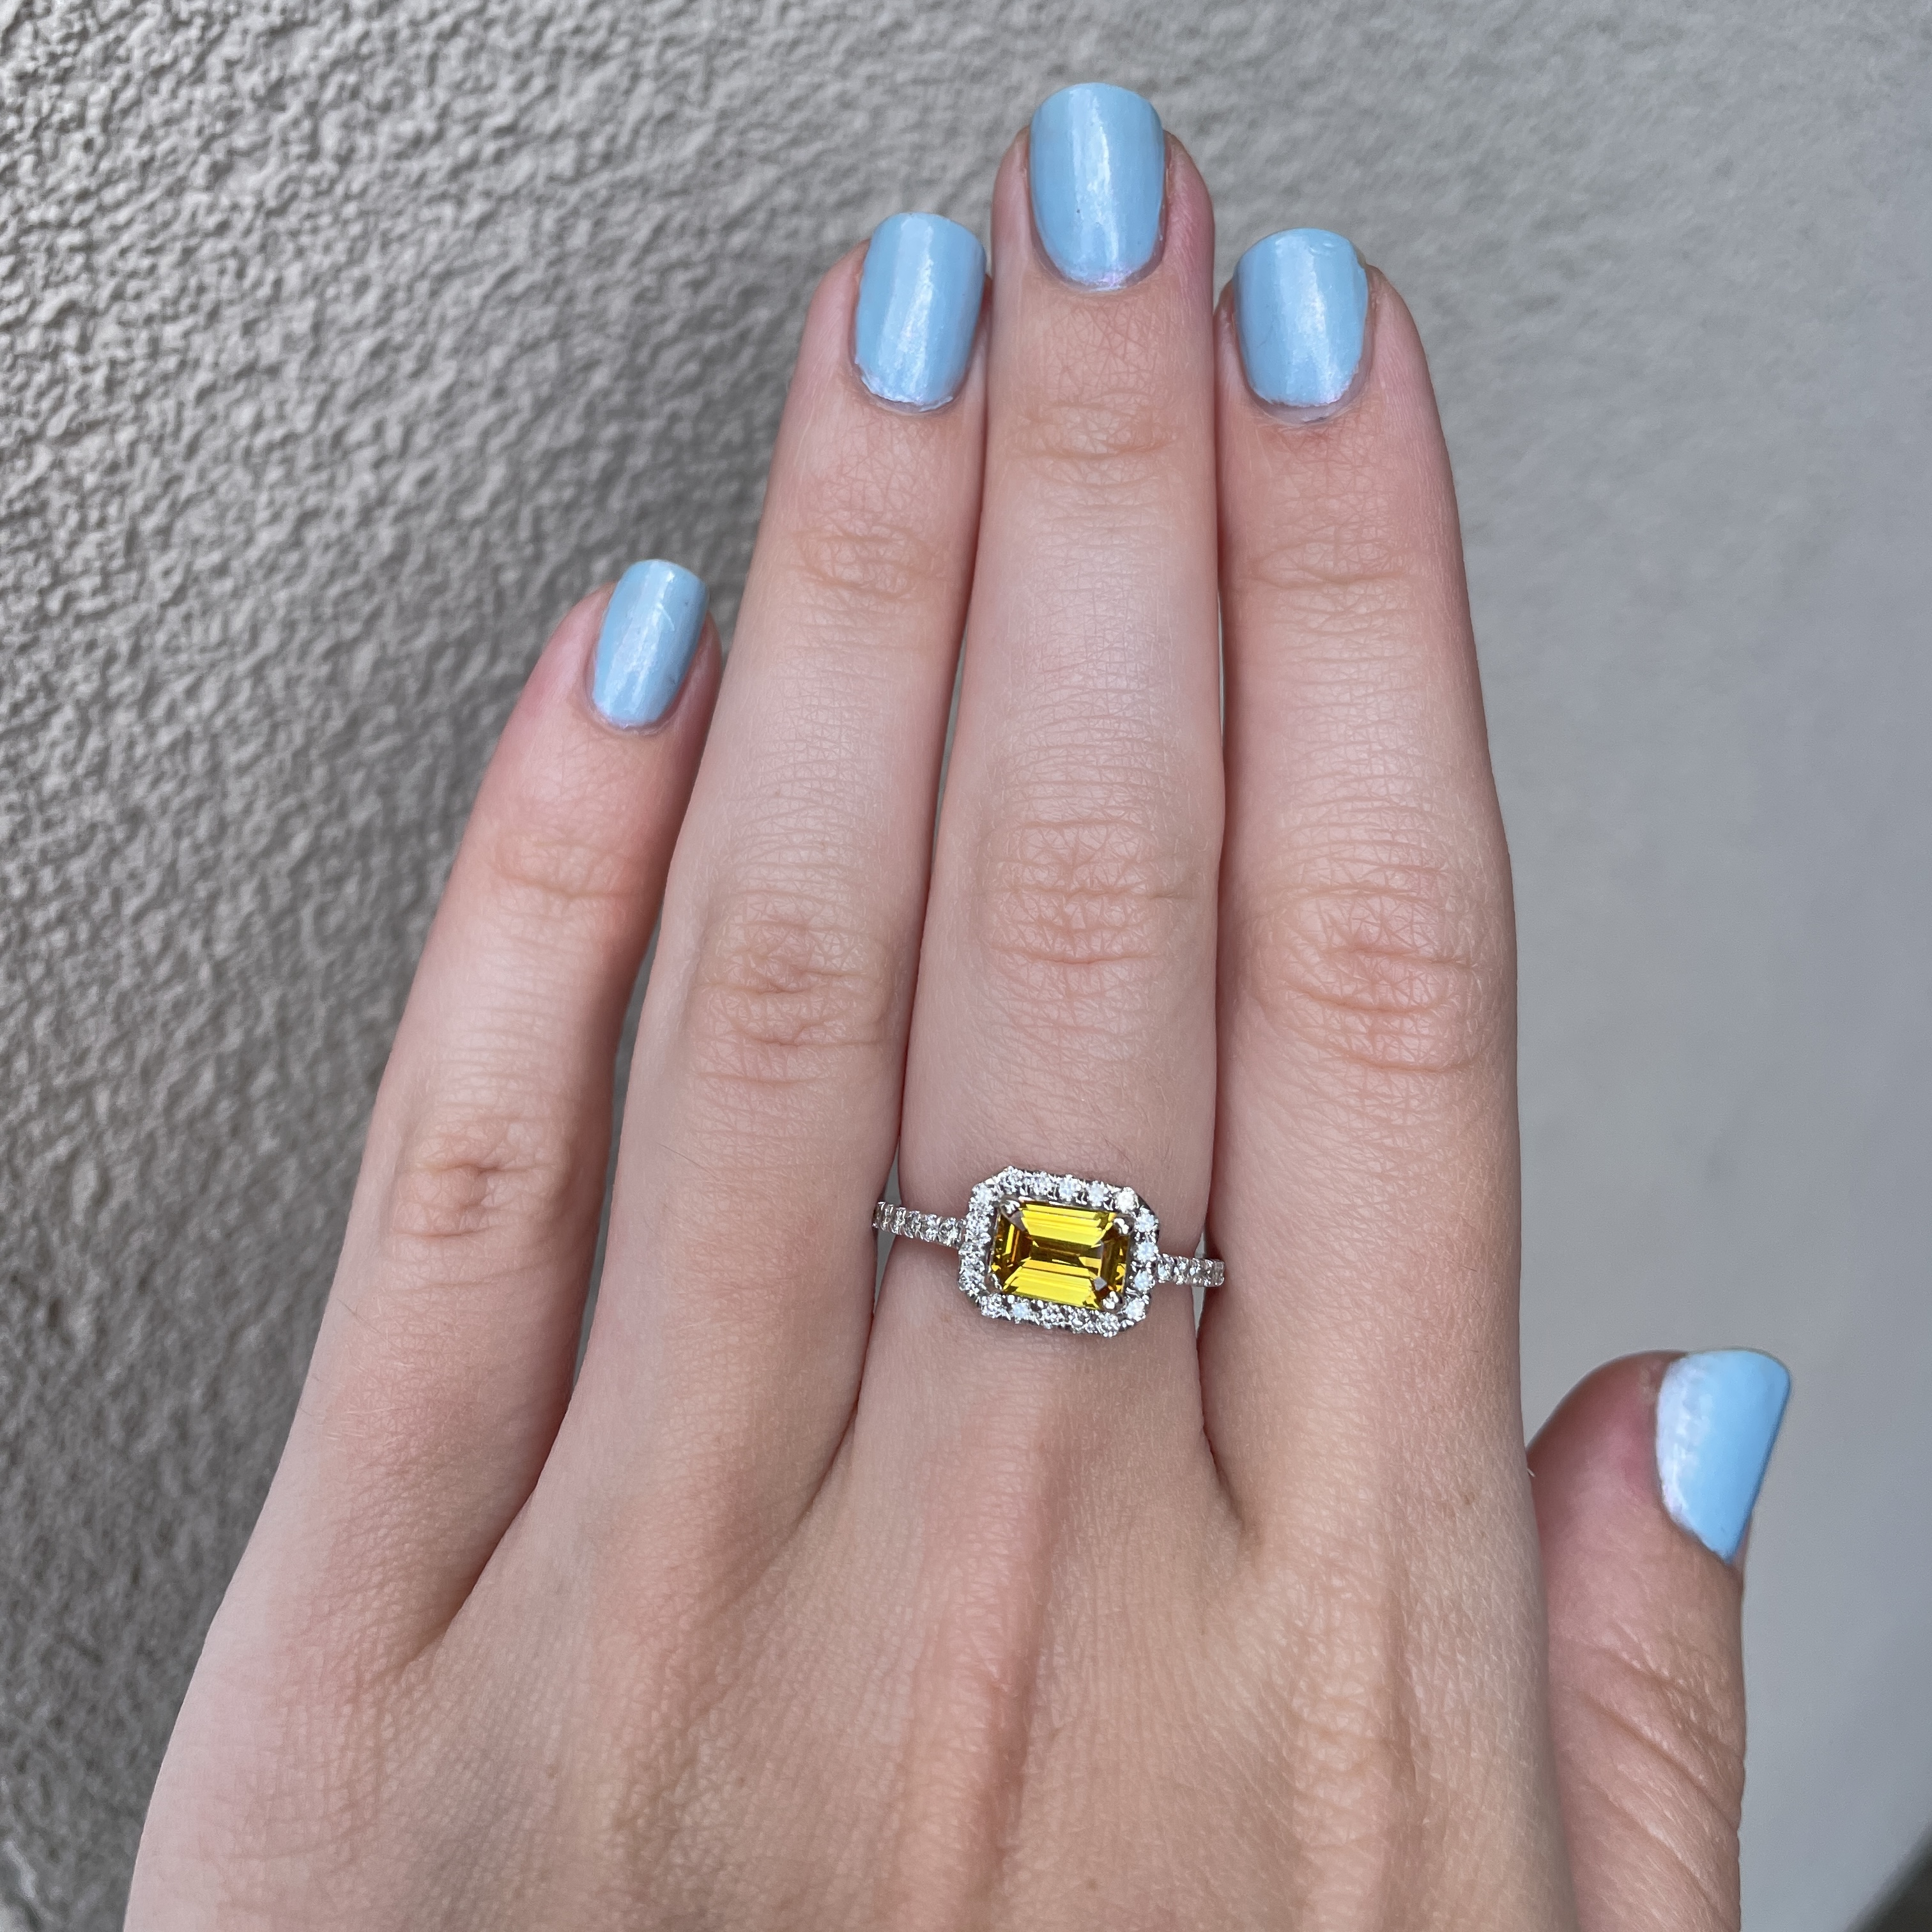 White Gold Yellow Sapphire Ring with Diamonds